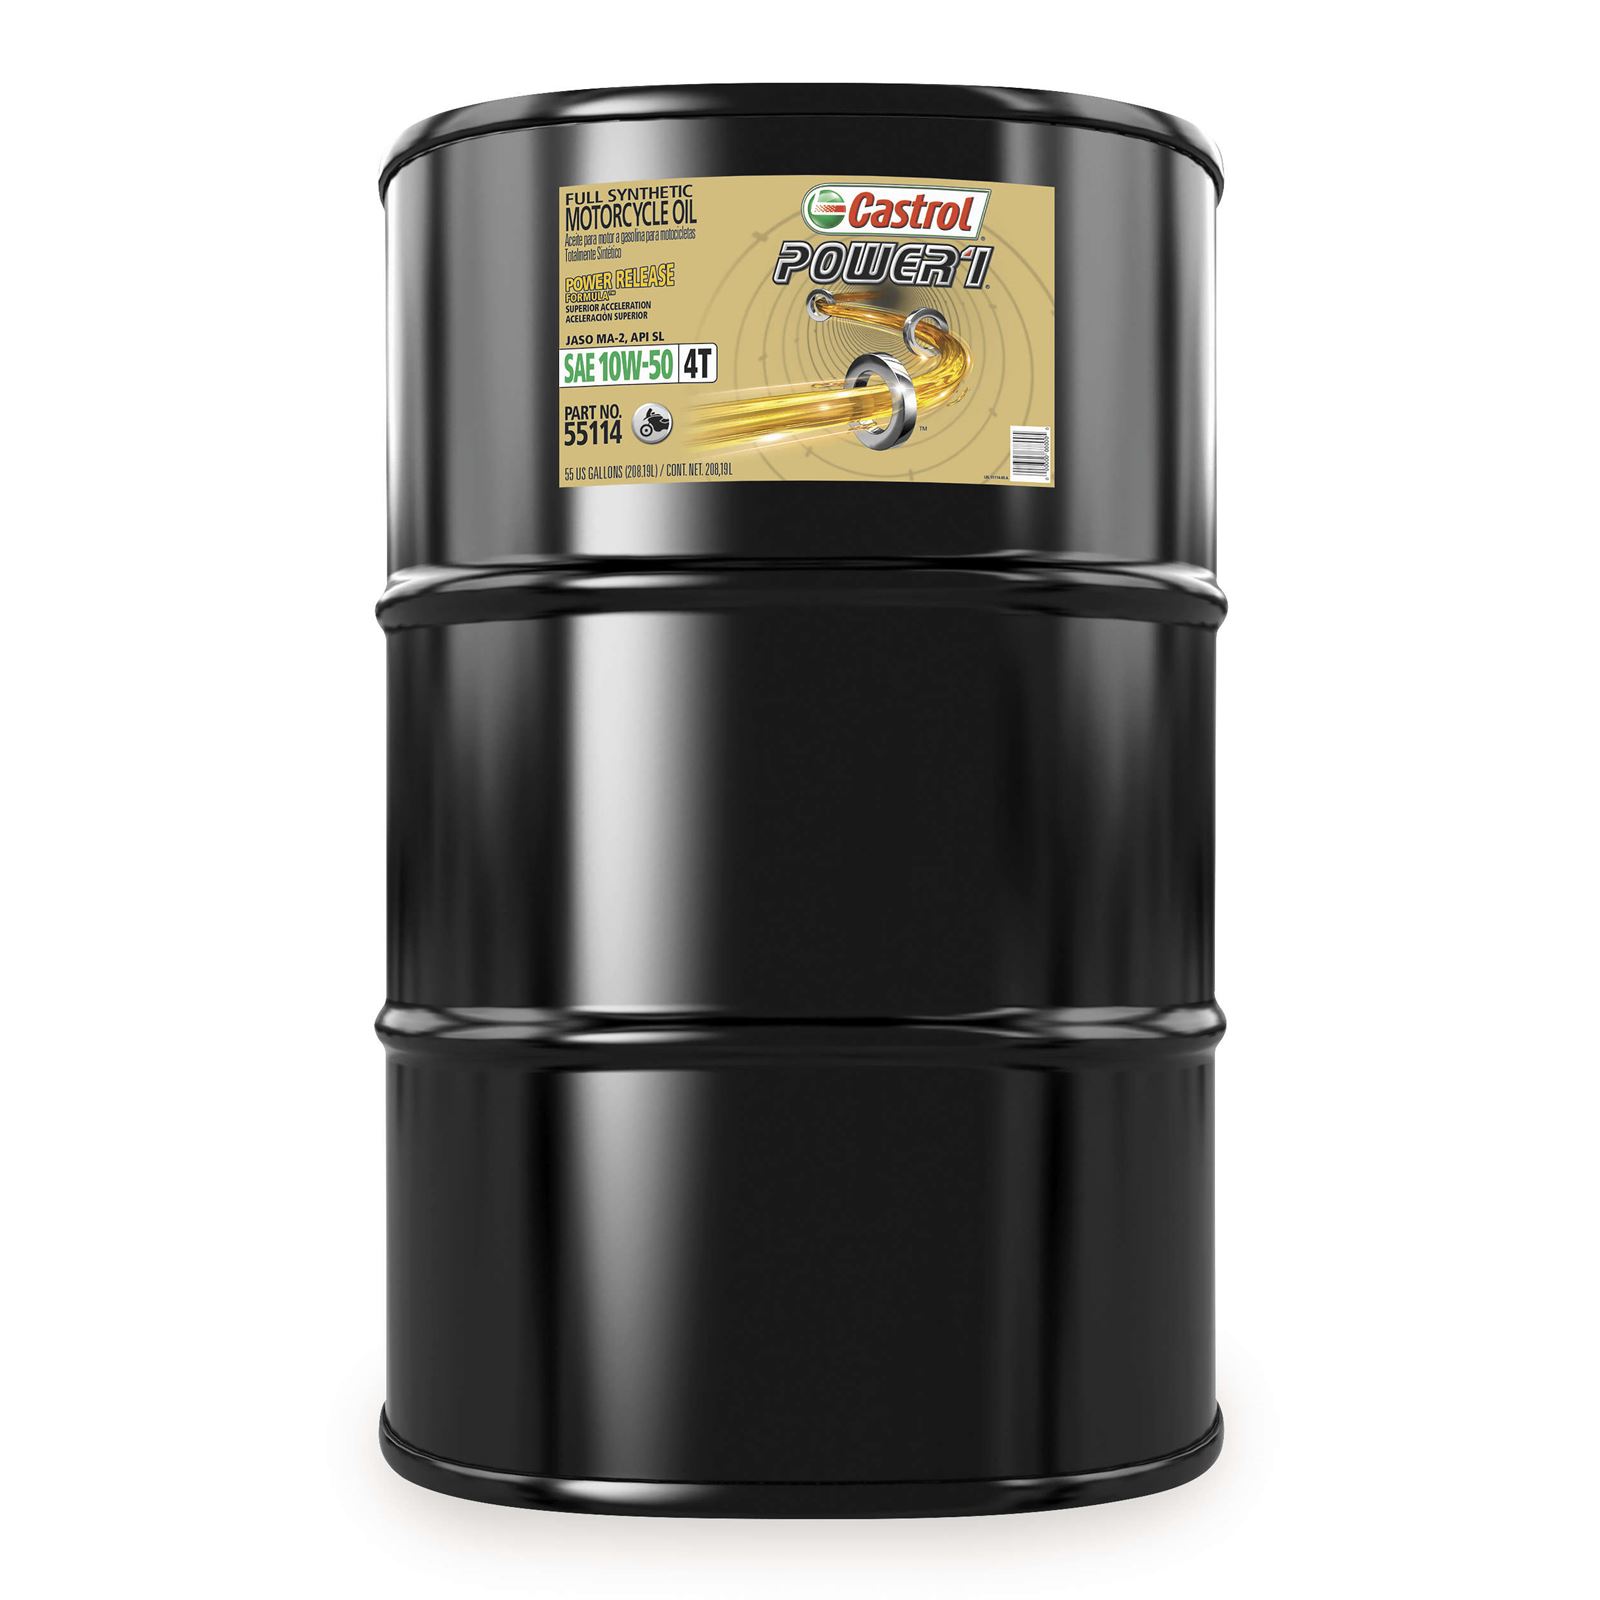 Castrol 100% Synthetic Oil